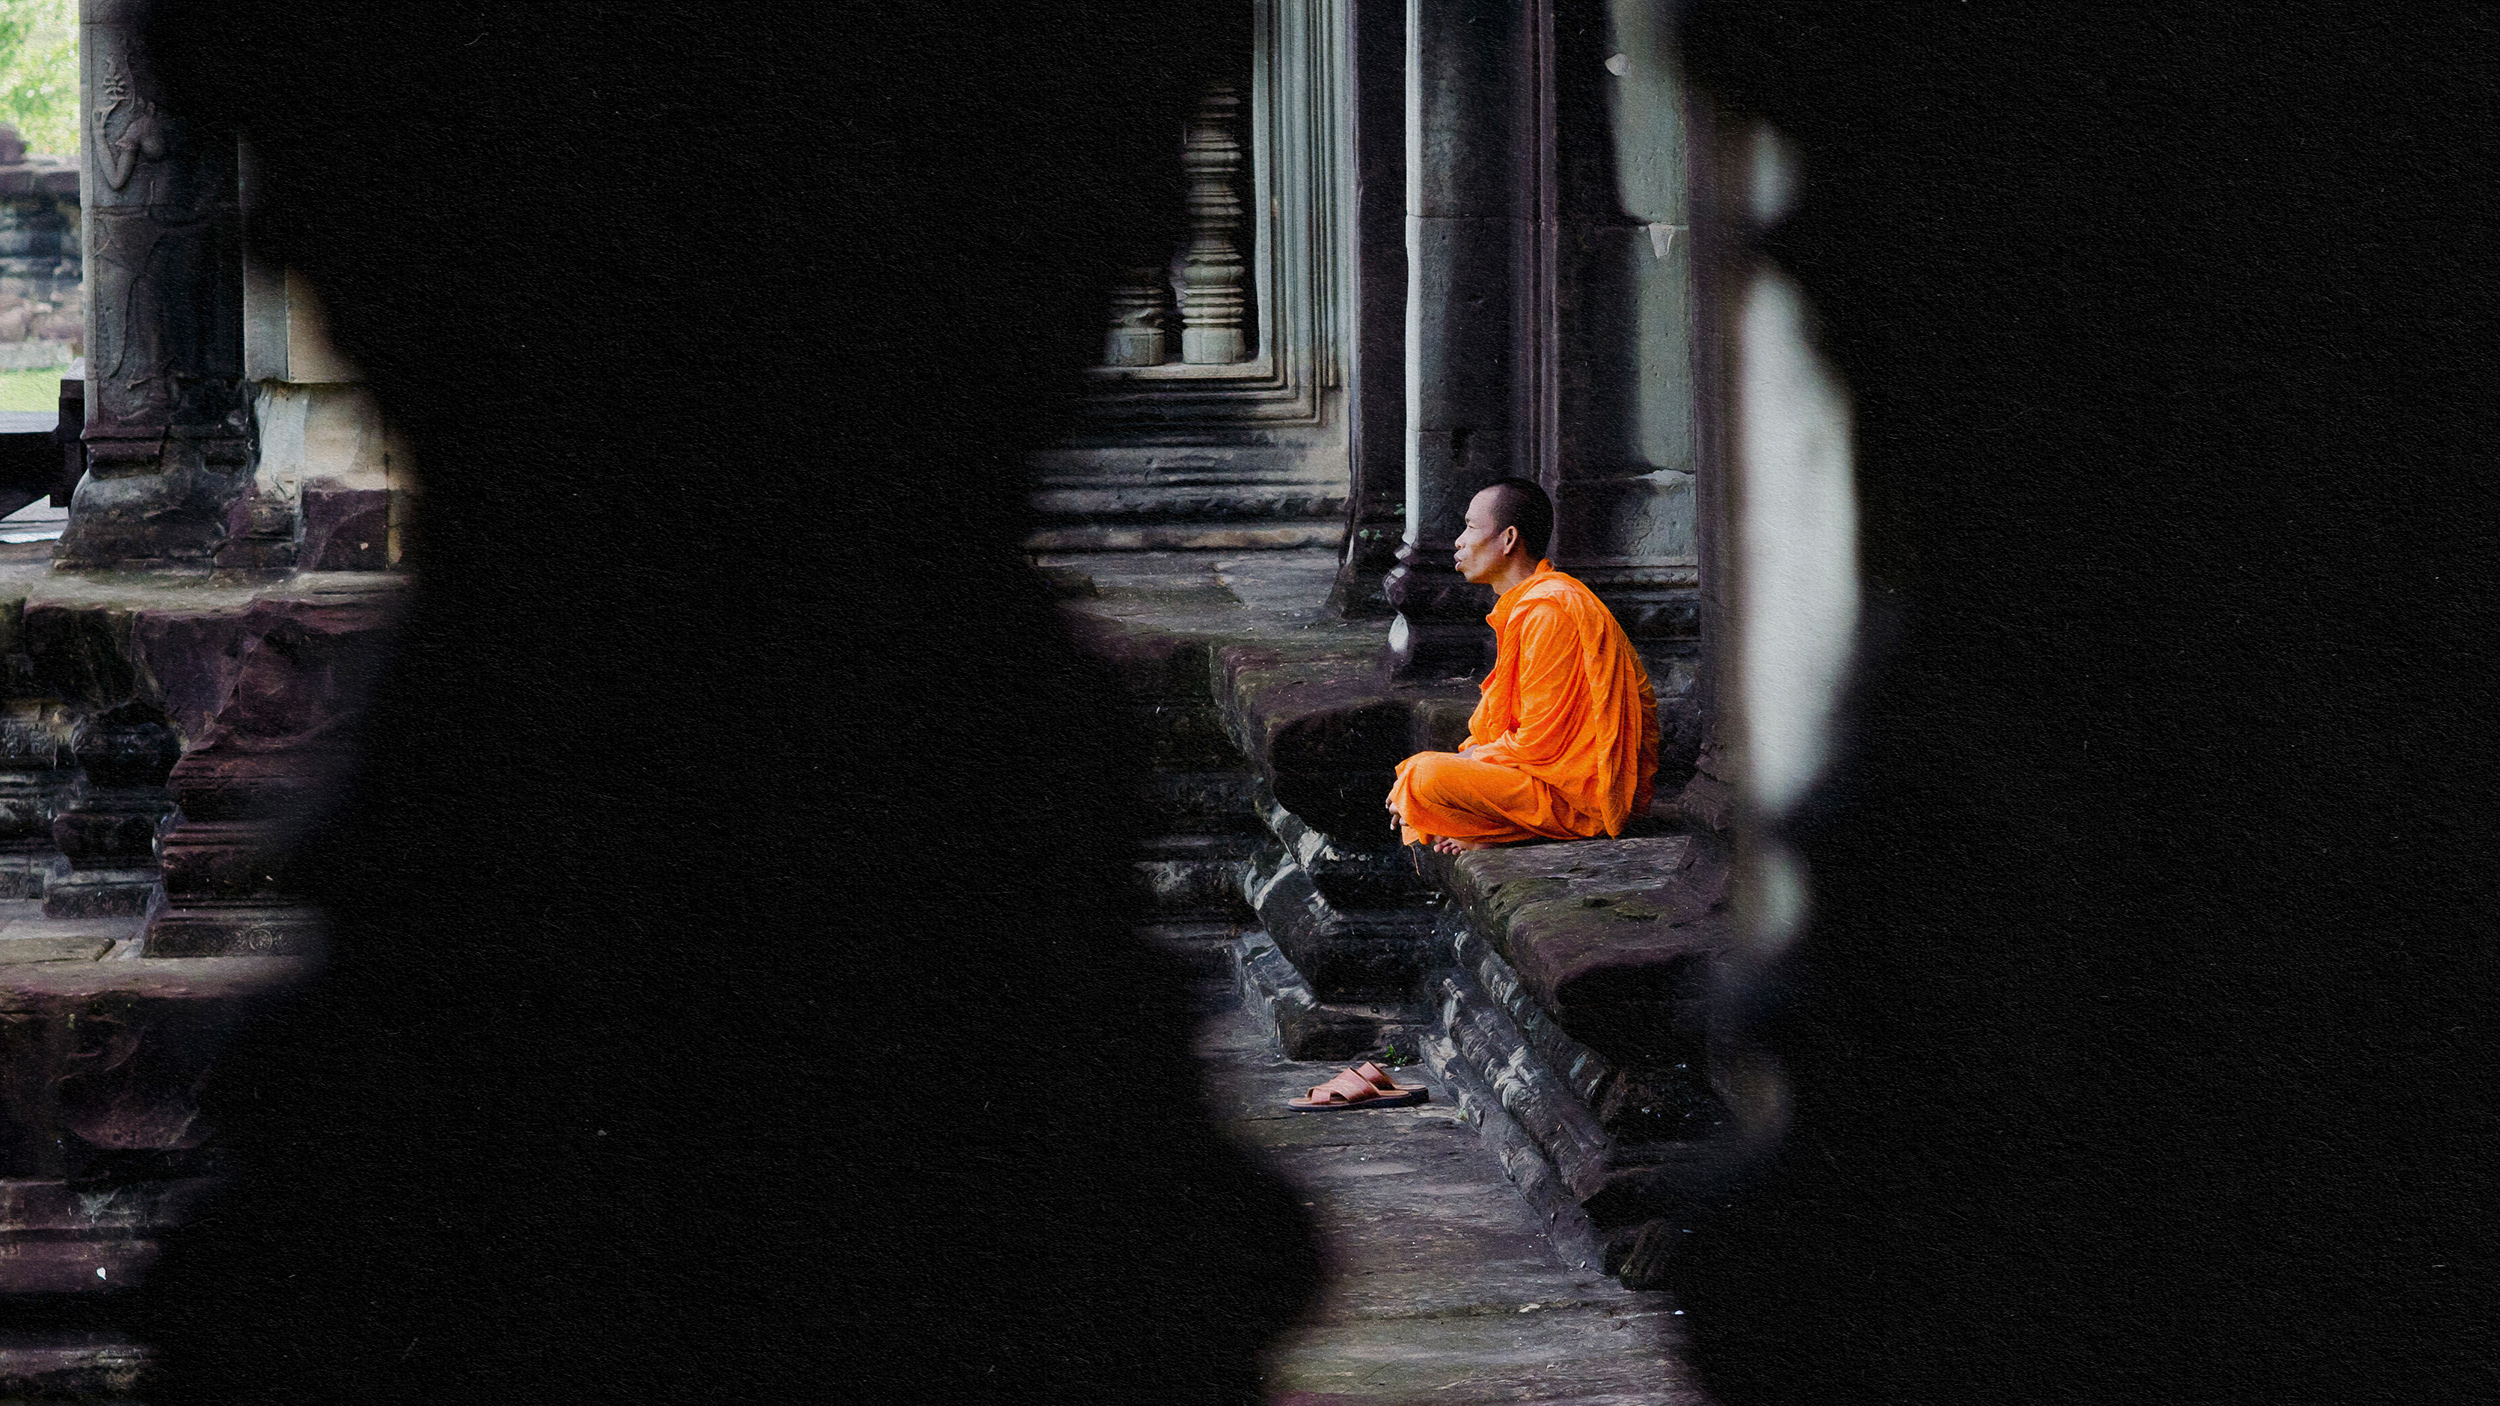 An orange-robed monk practicing mindfulness on a stone wall.